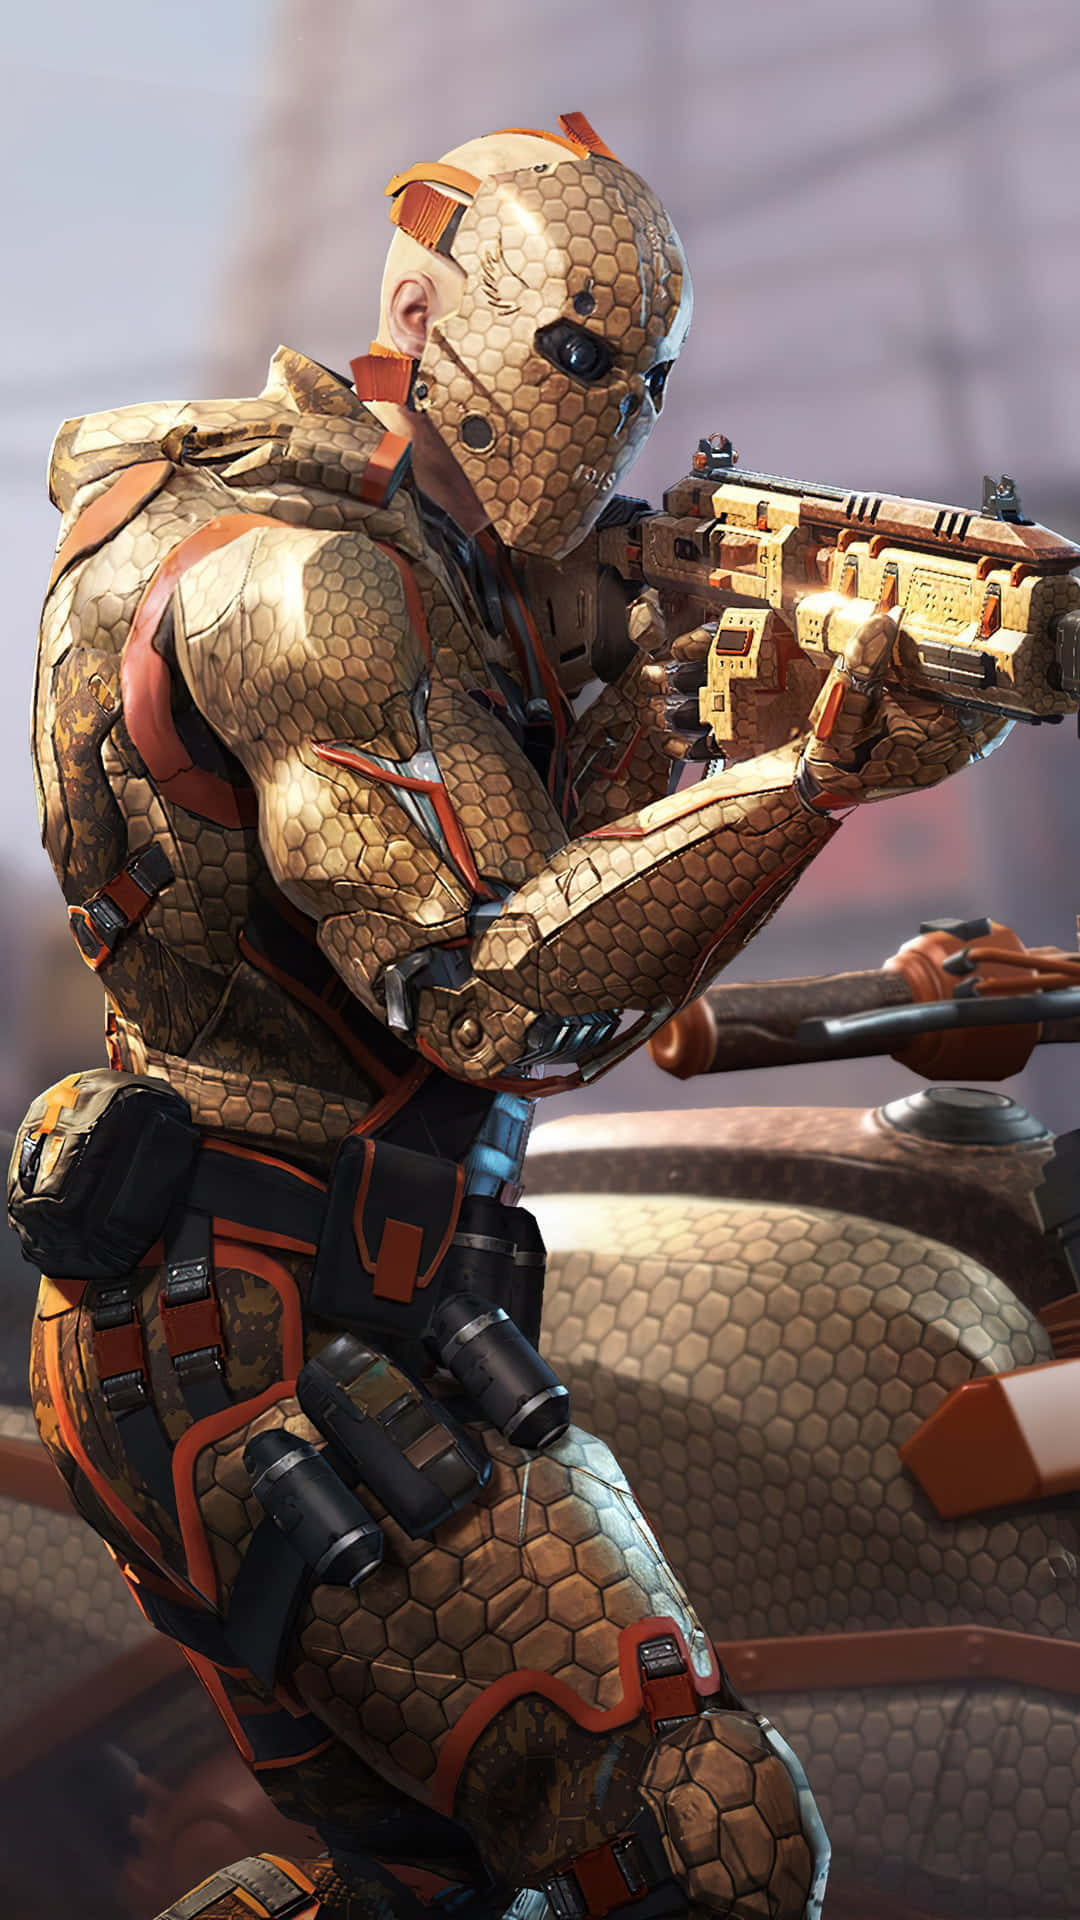 Stunning COD Mobile Character Skins in Action Wallpaper